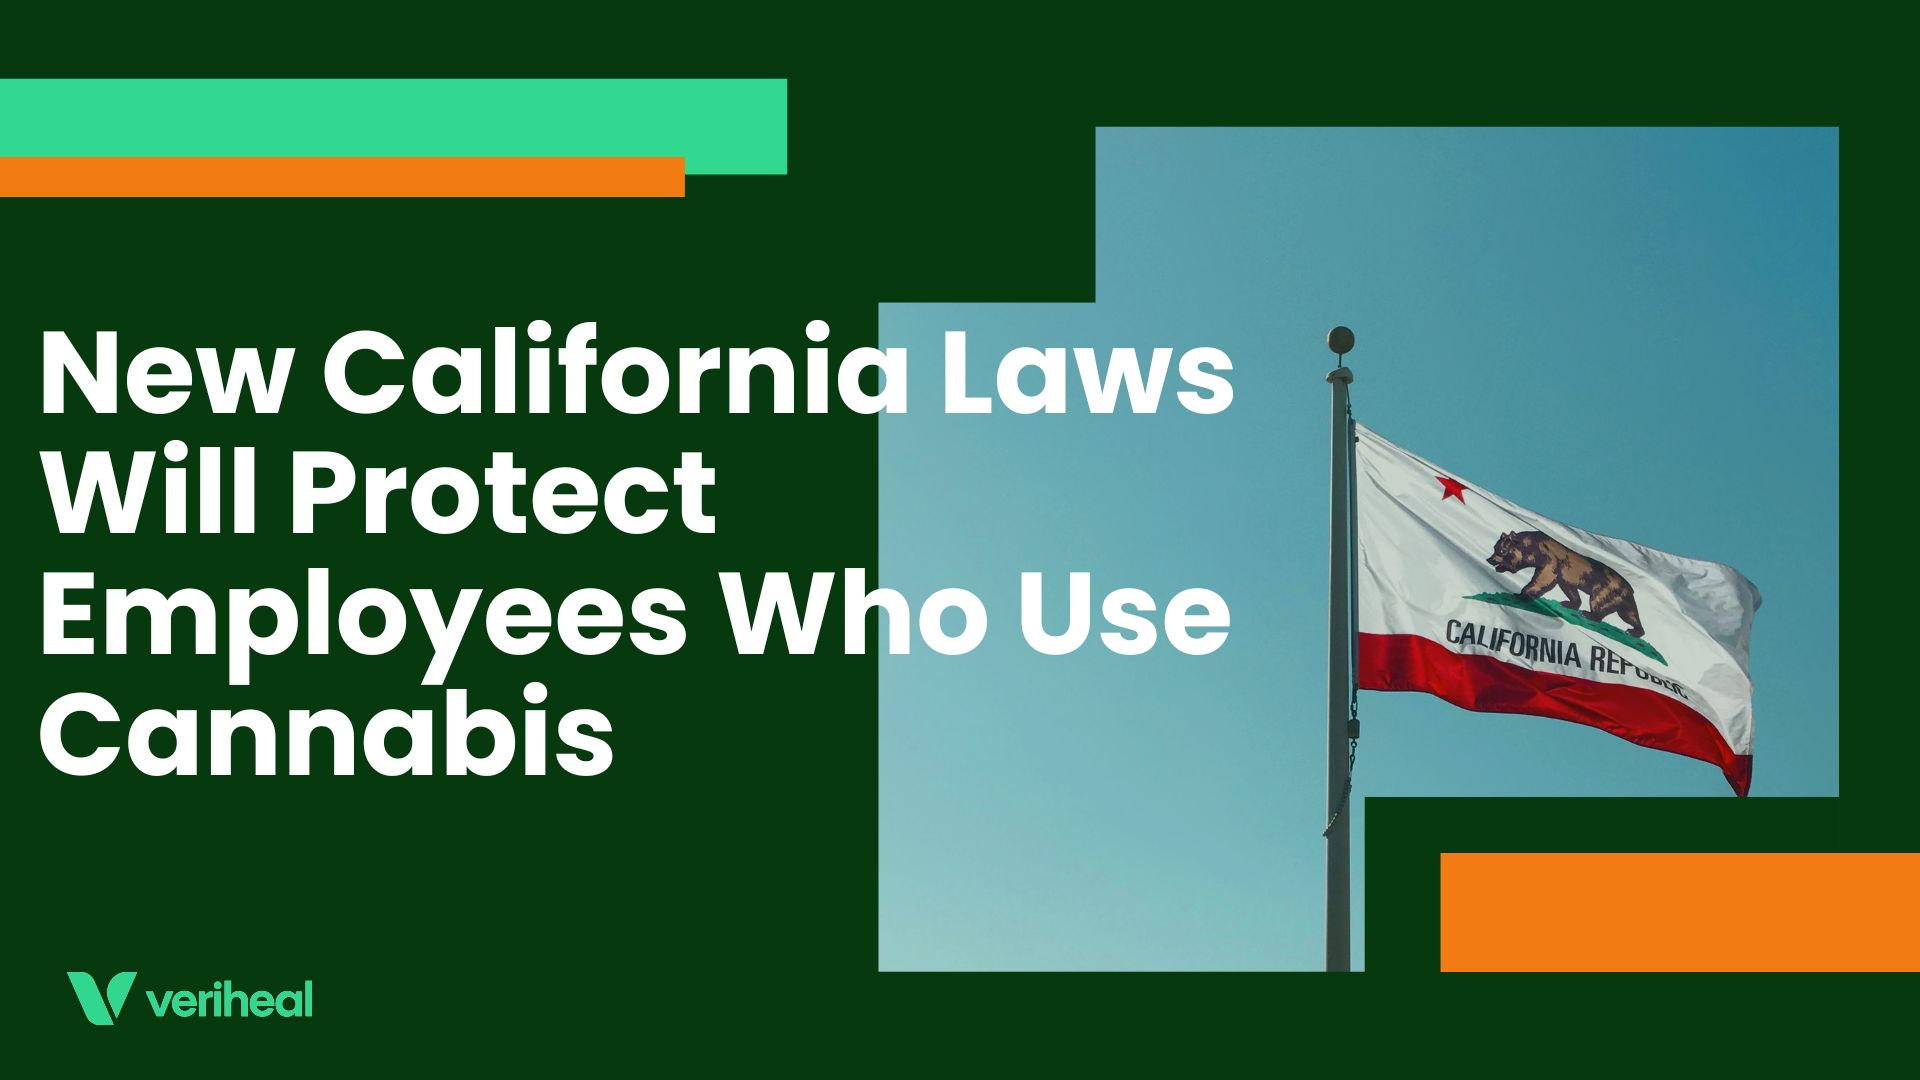 New California Laws Will Protect Employees Who Use Cannabis